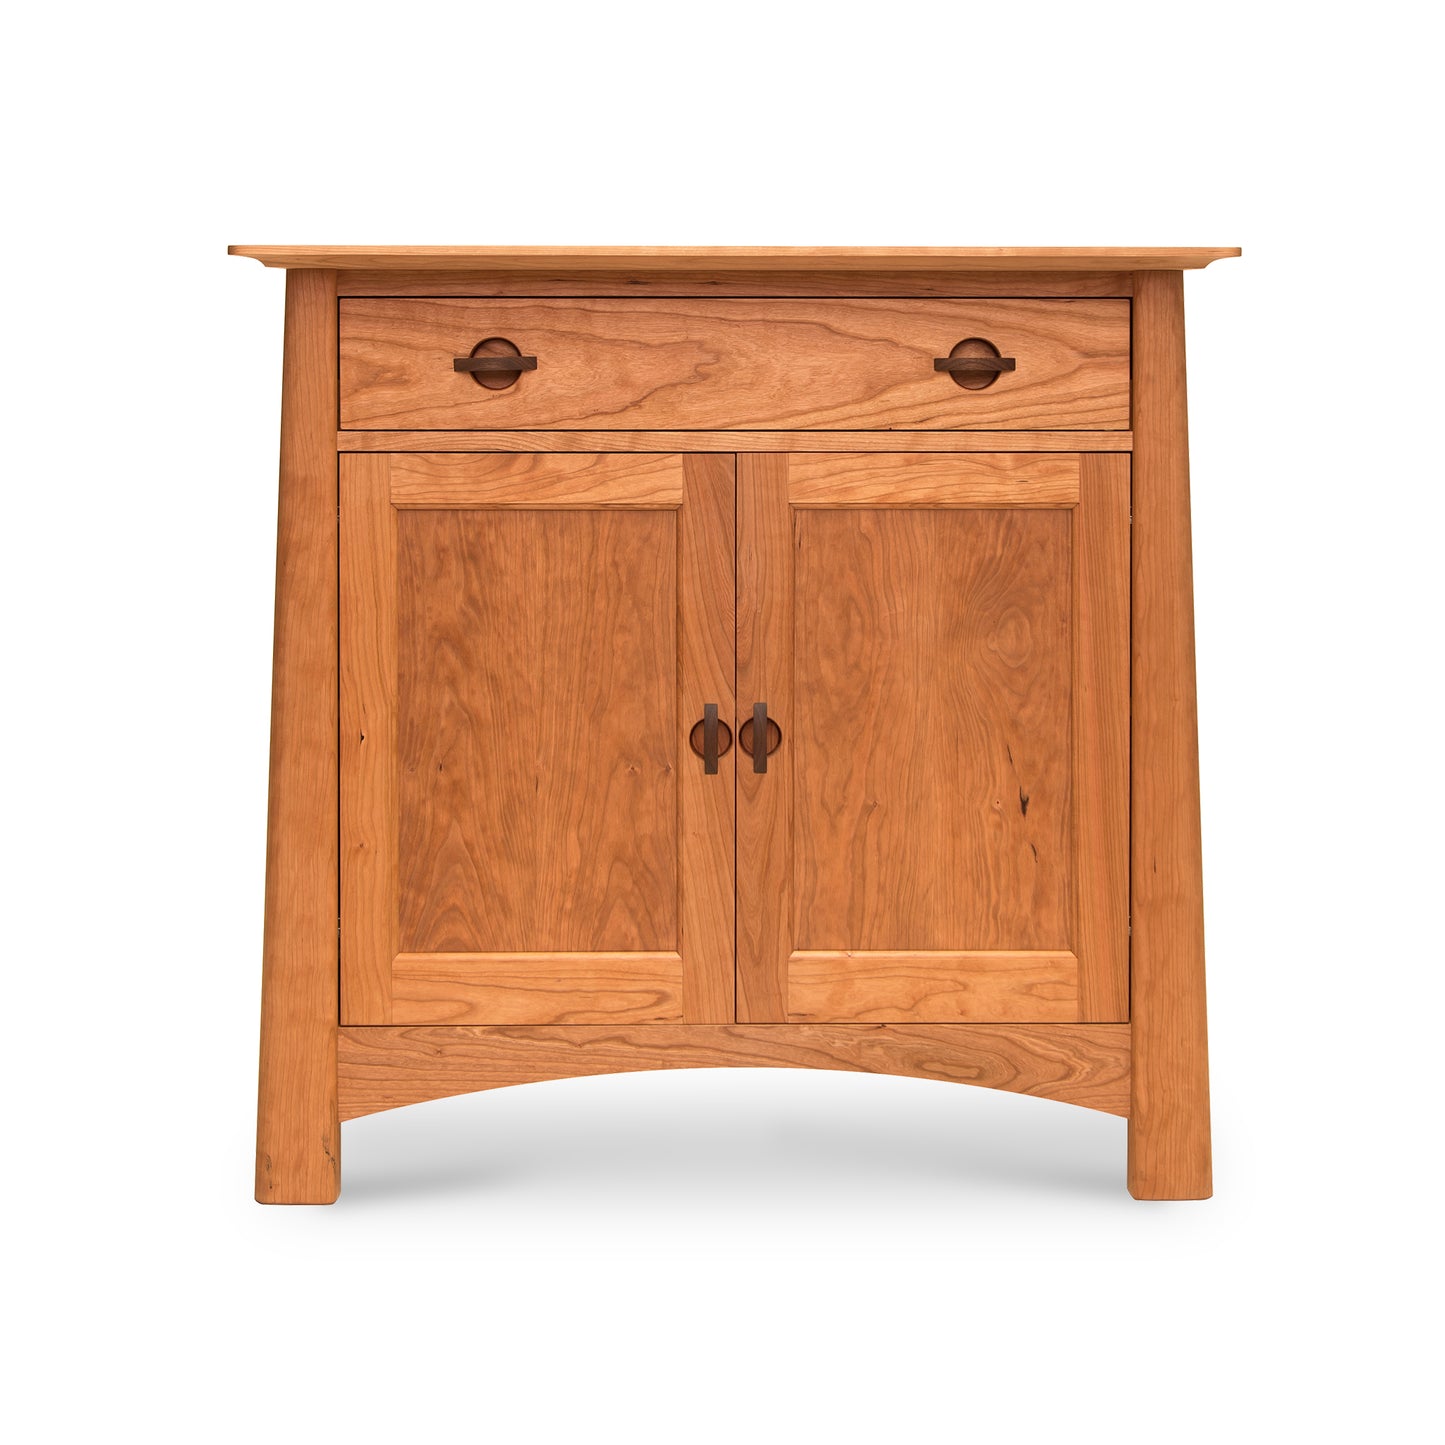 A Maple Corner Woodworks Cherry Moon Small 38" Sideboard with a solid hardwood cabinet with a smooth, eco-friendly oil finish, featuring two doors and a single drawer, all with round, dark knobs. The sideboard is set against a solid white background.